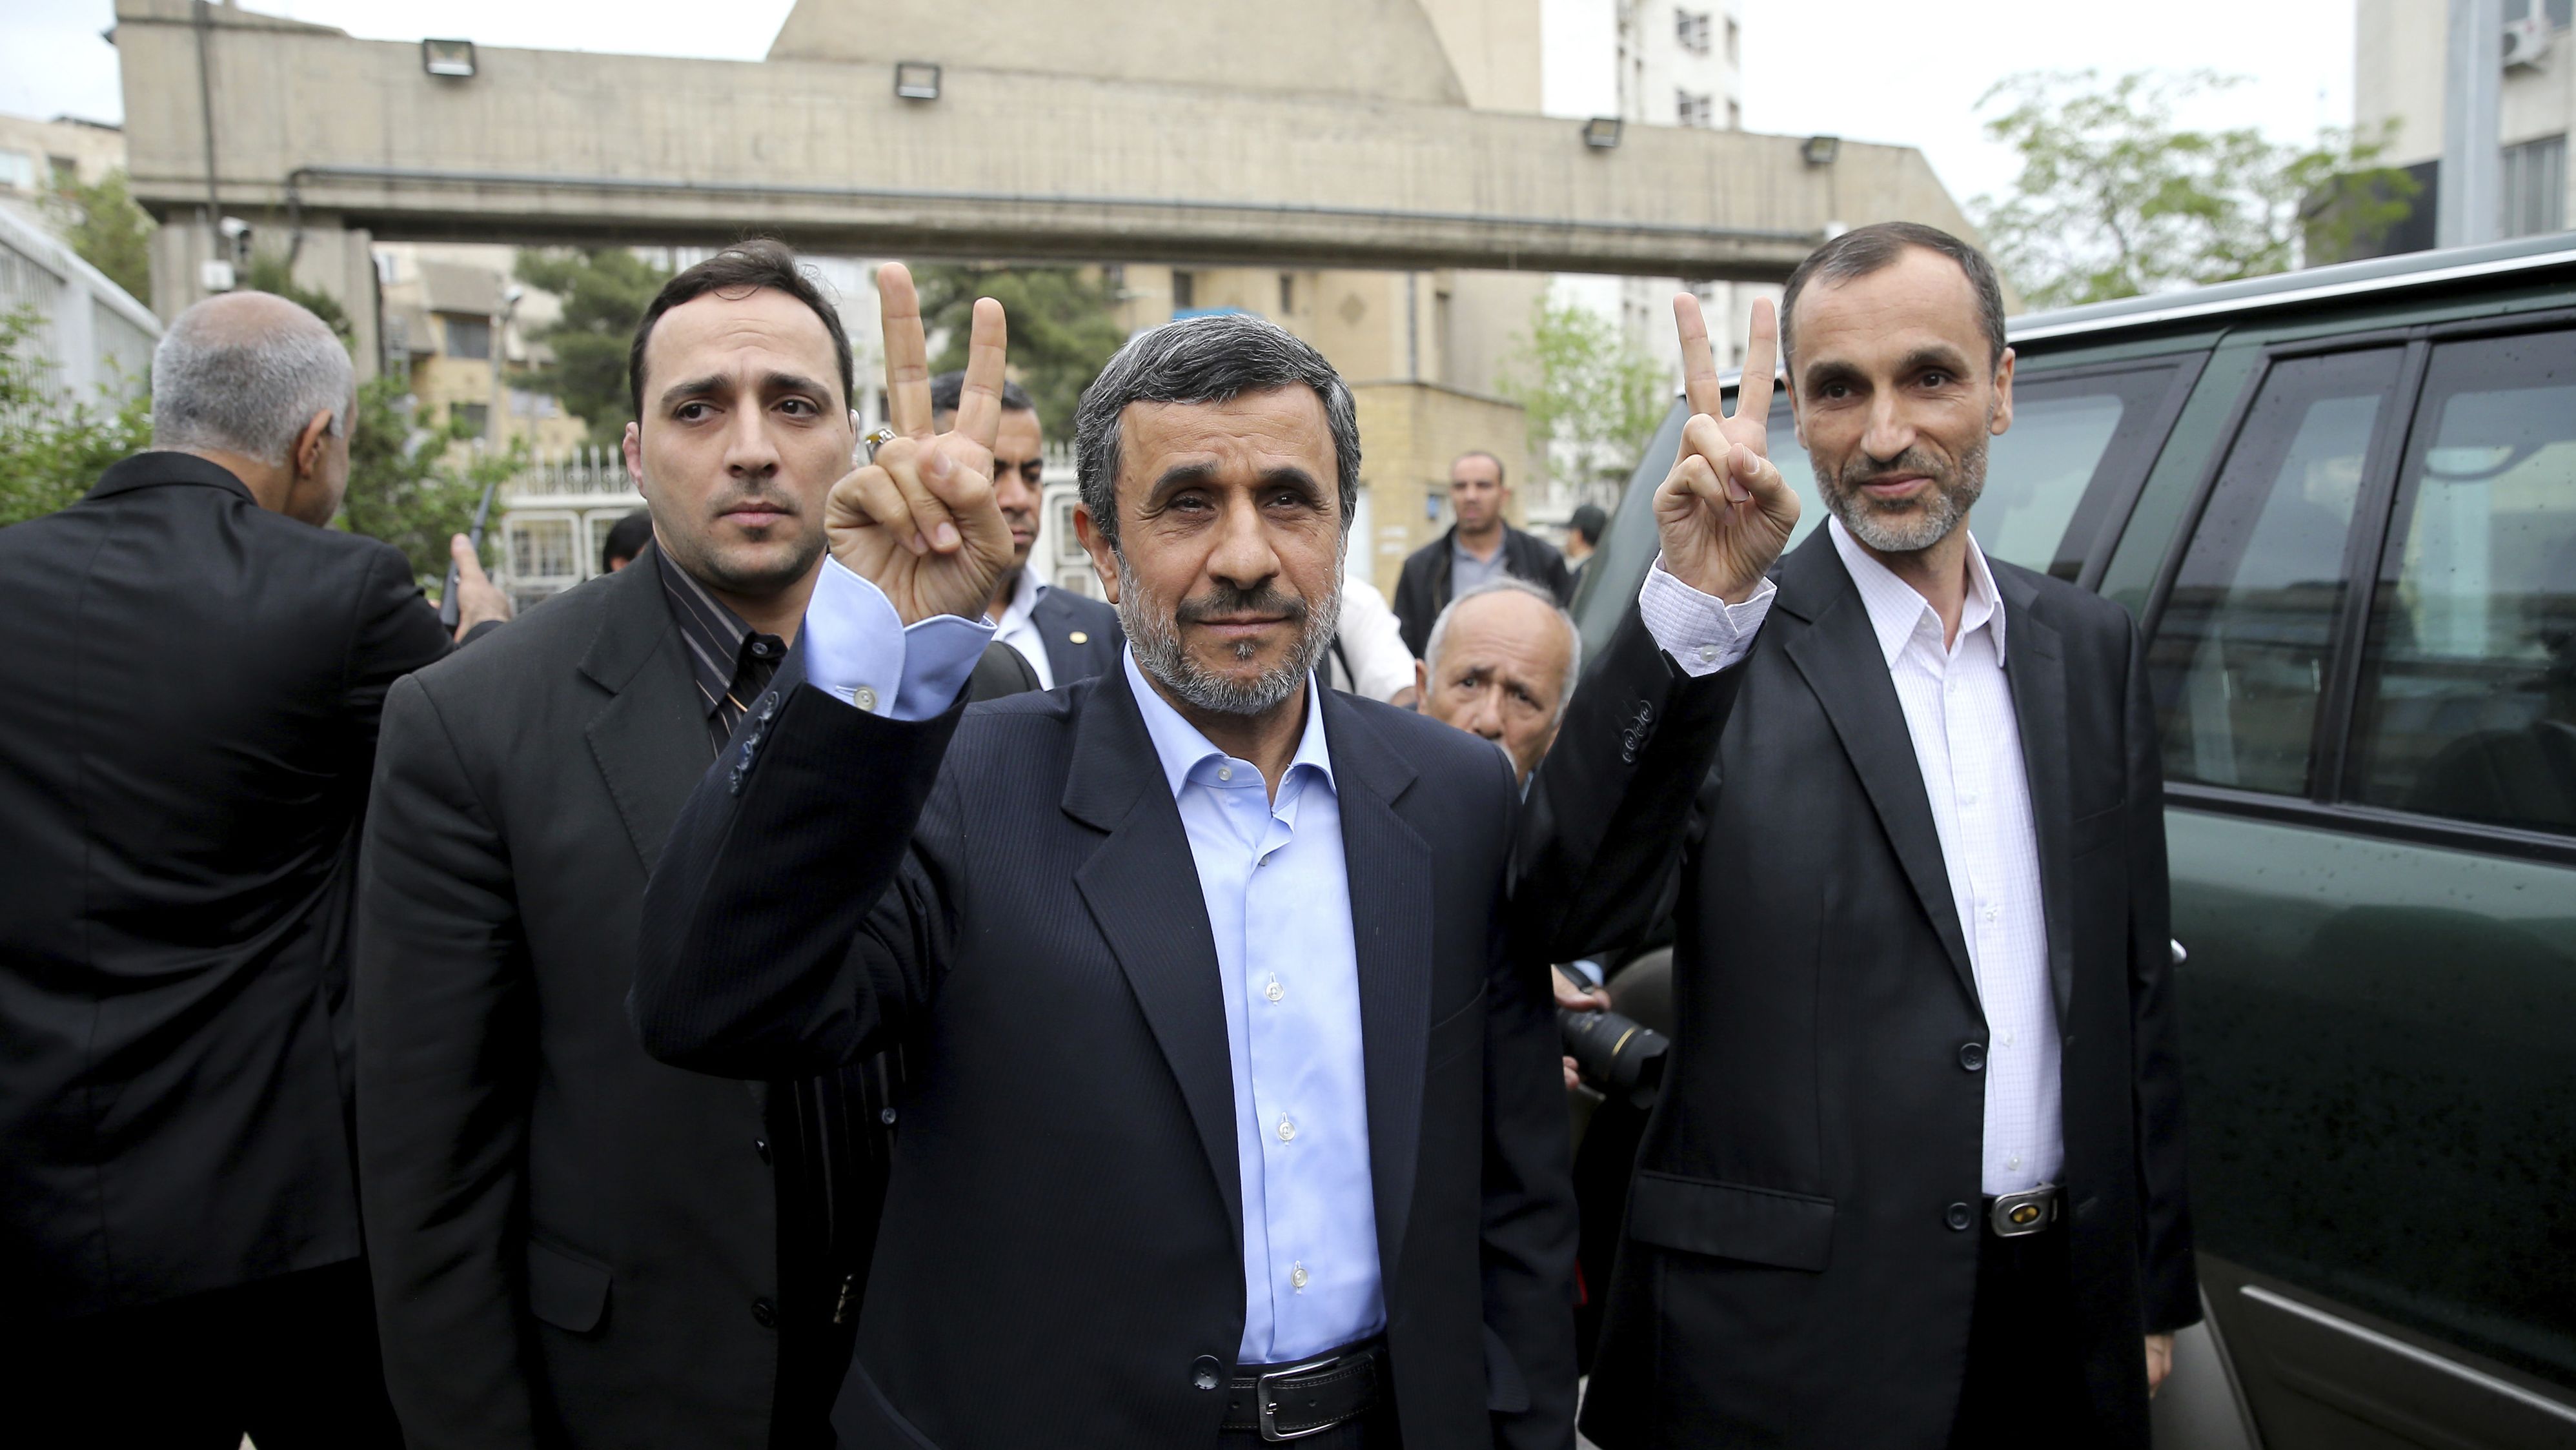 Former Iranian President Mahmoud Ahmadinejad, center, and his close ally Hamid Baghaei flash the victory sign as they arrive at the Interior Ministry to register their candidacy on Wednesday.